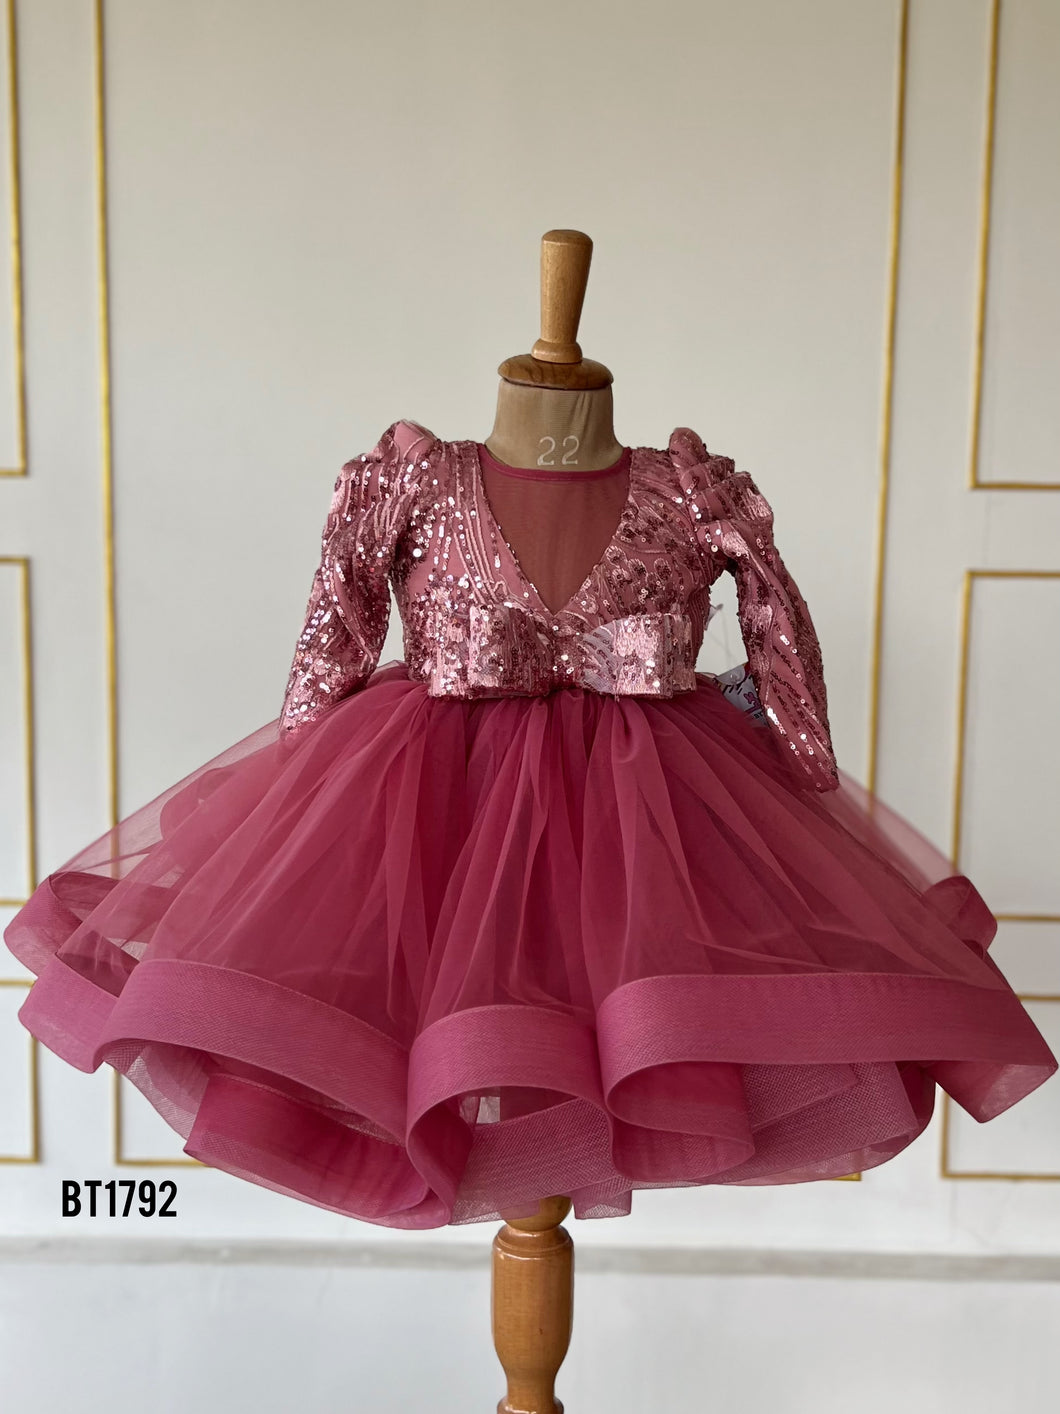 BT1792 RoseGold Bling Party Wear Frock For Baby Girls